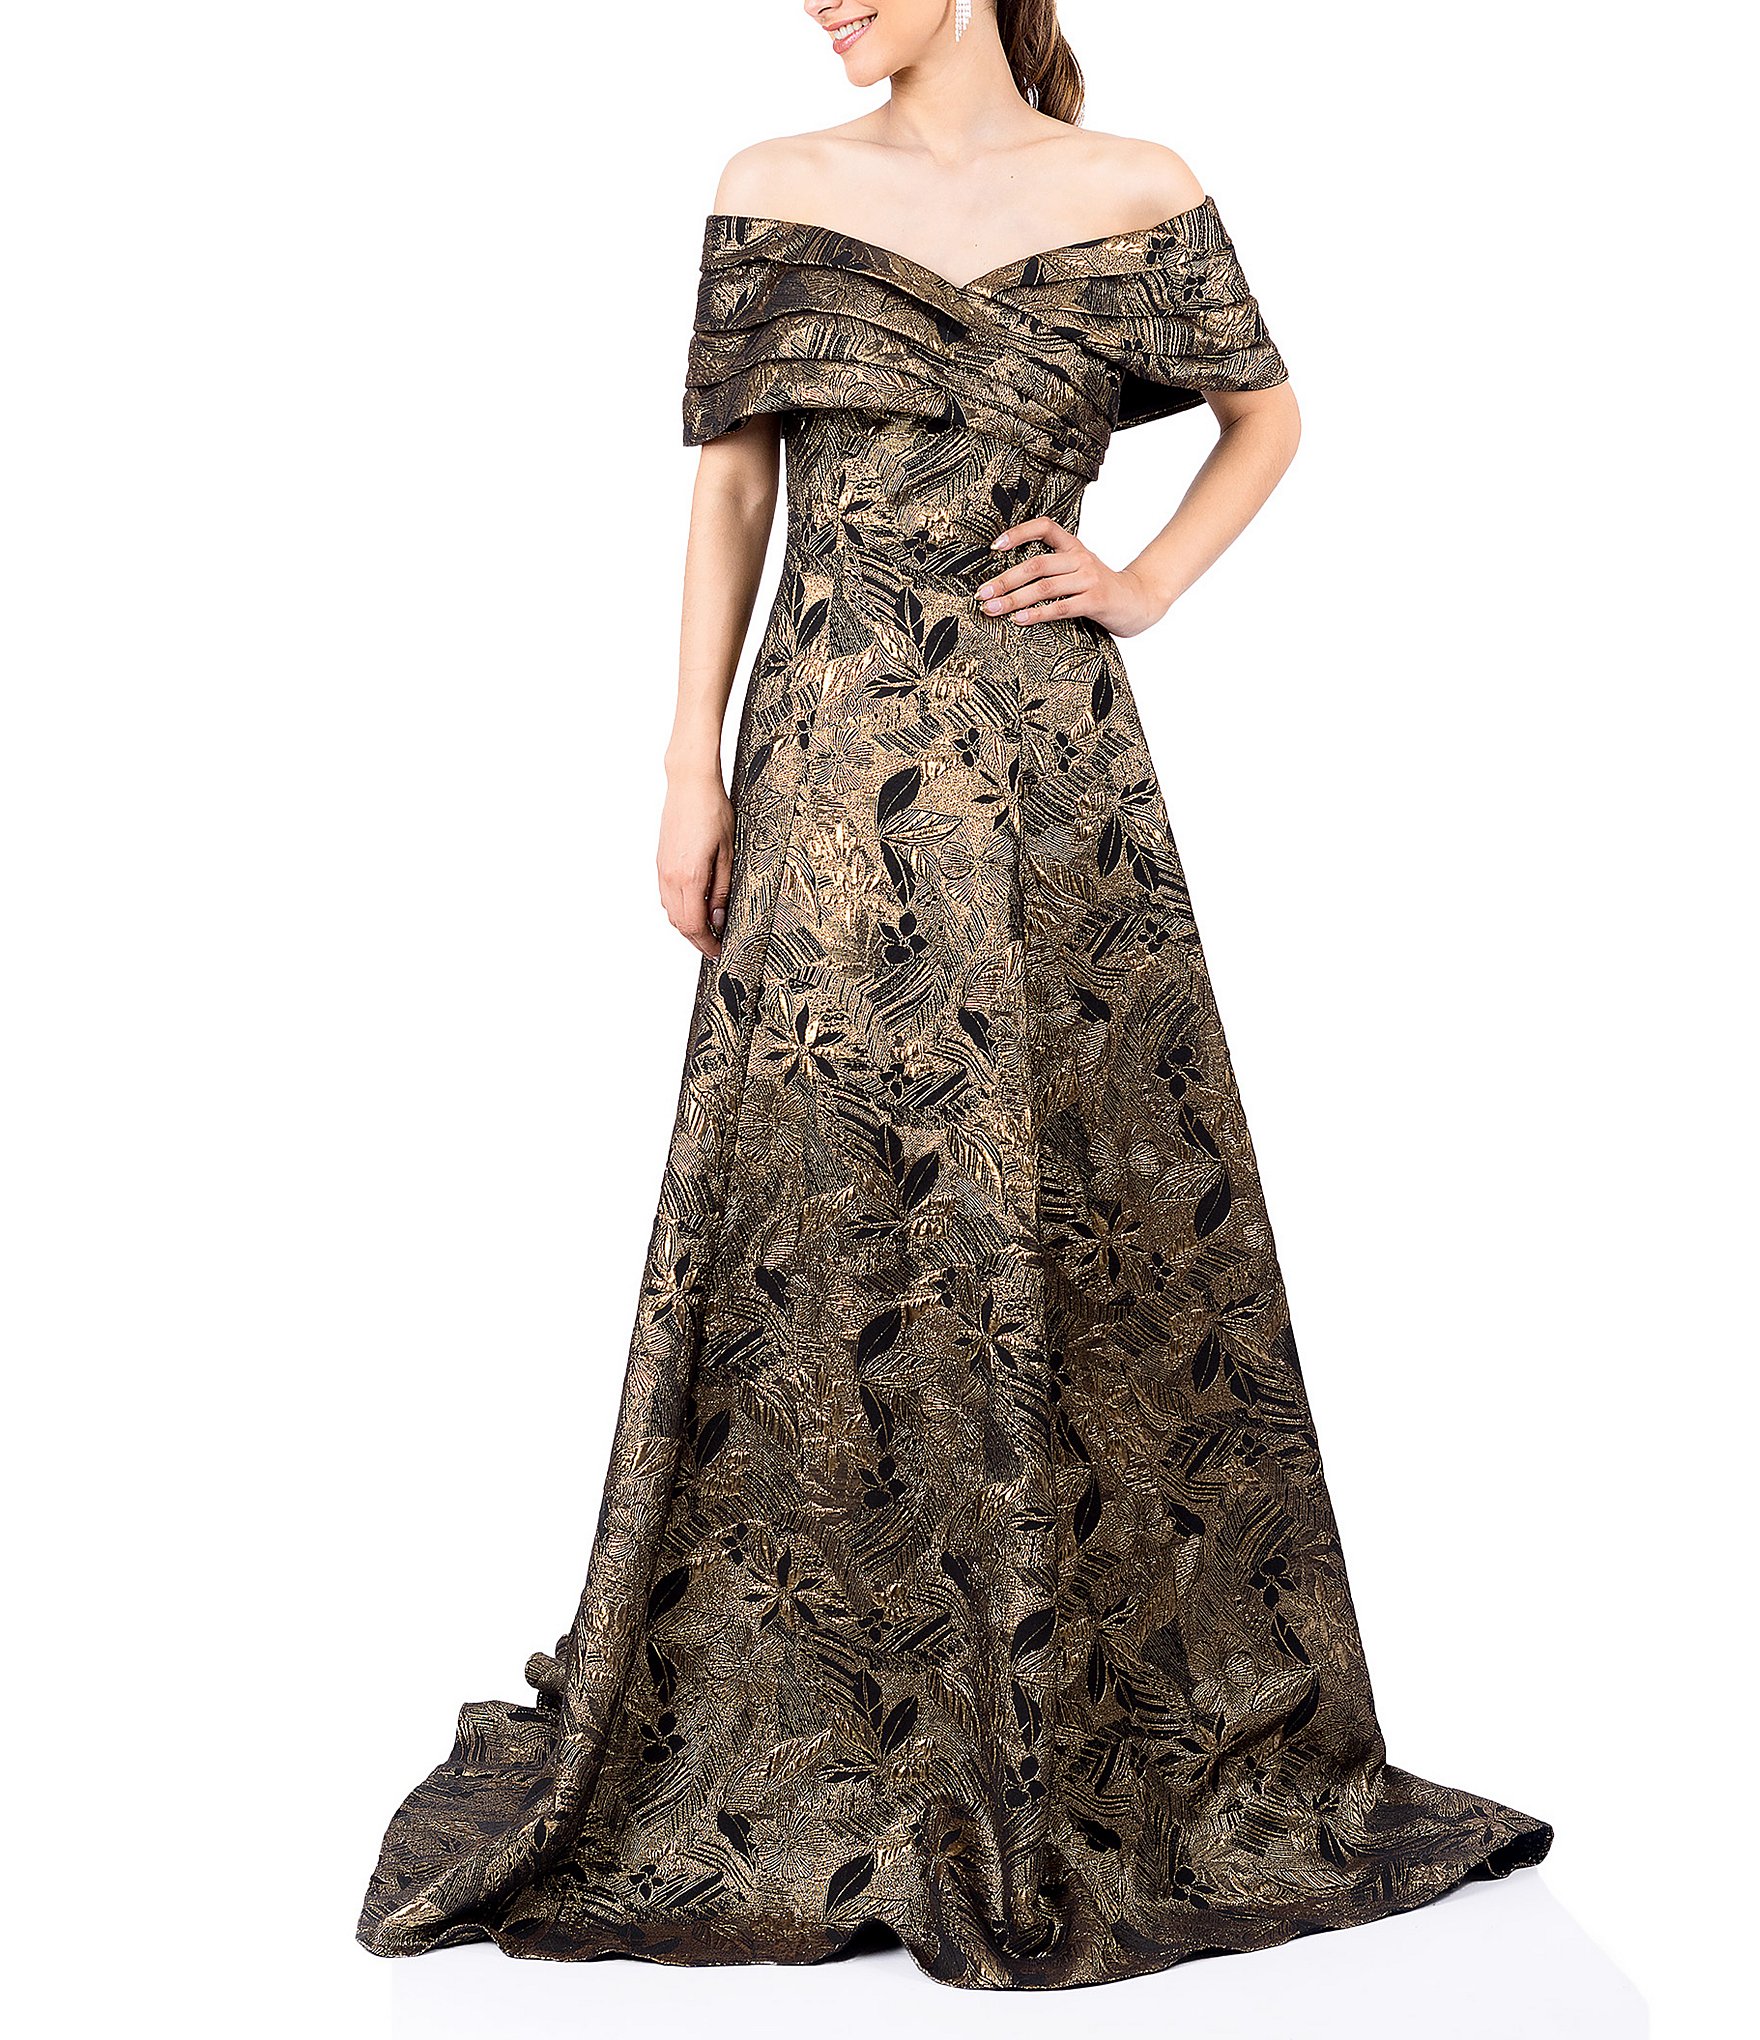 Black And Gold Dresses: Women'S Formal Dresses & Evening Gowns | Dillard'S